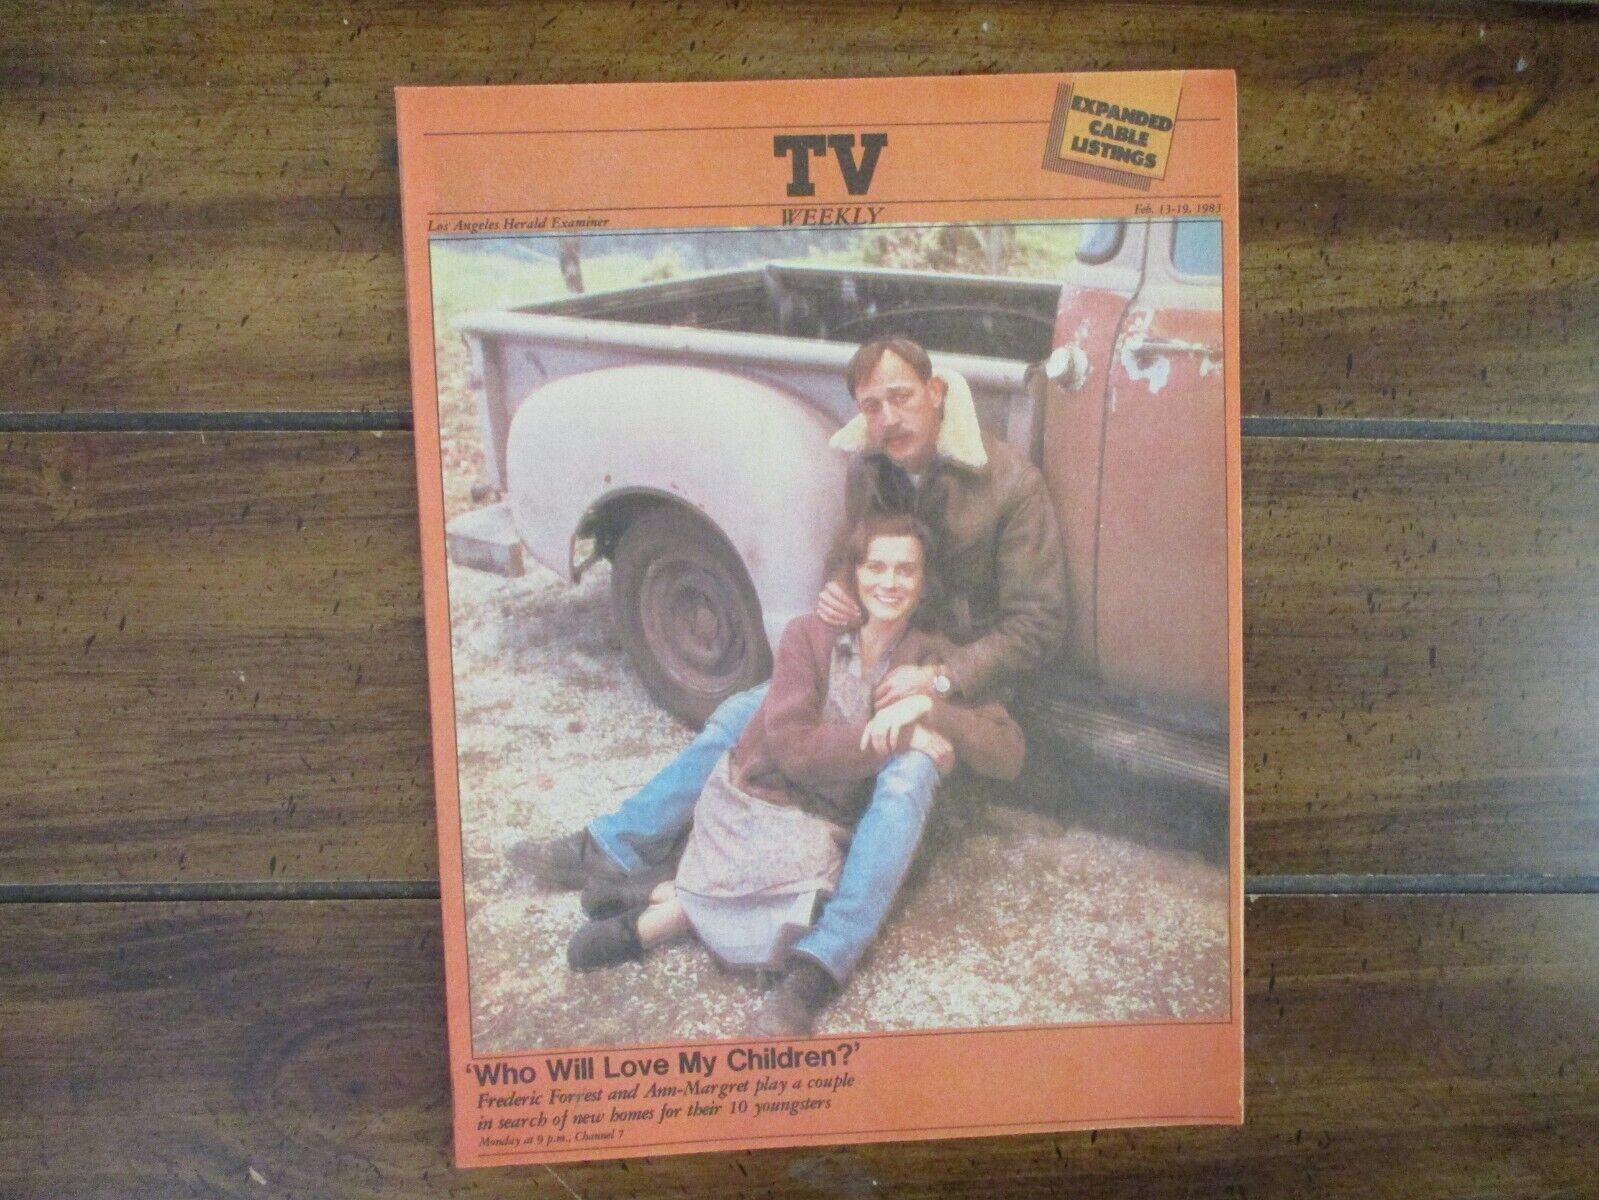 Feb. 13, 1983 L. A. Herald TV  Magaz(ANN-MARGRET/ANDY  GRIFFITH/FREDERIC FORREST